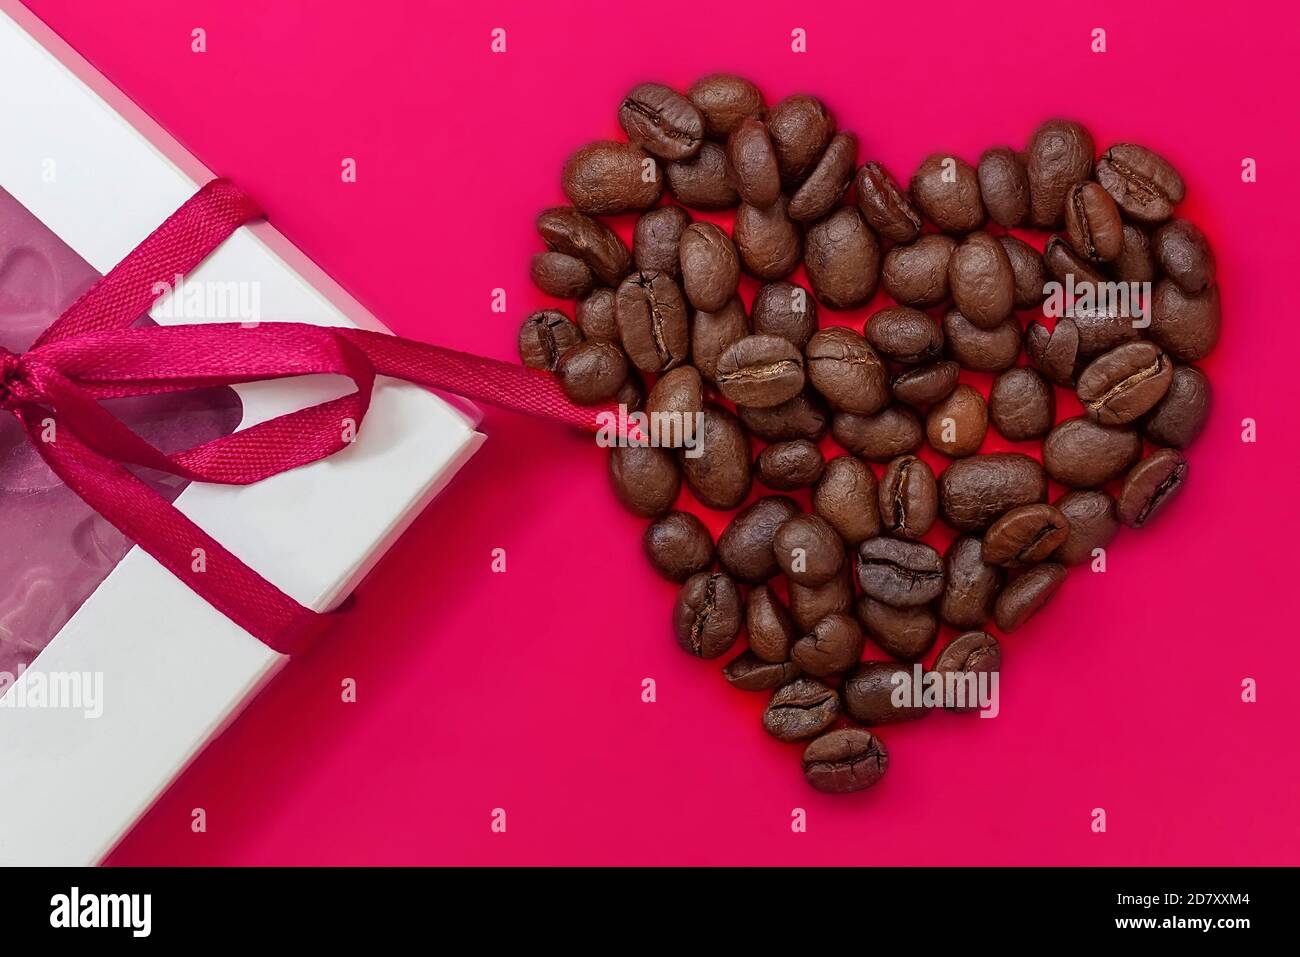 Coffee heart, roasted coffee beans and chocolate. Concept of Valentine's Day, good mood, Endorphins, greeting cards. Stock Photo